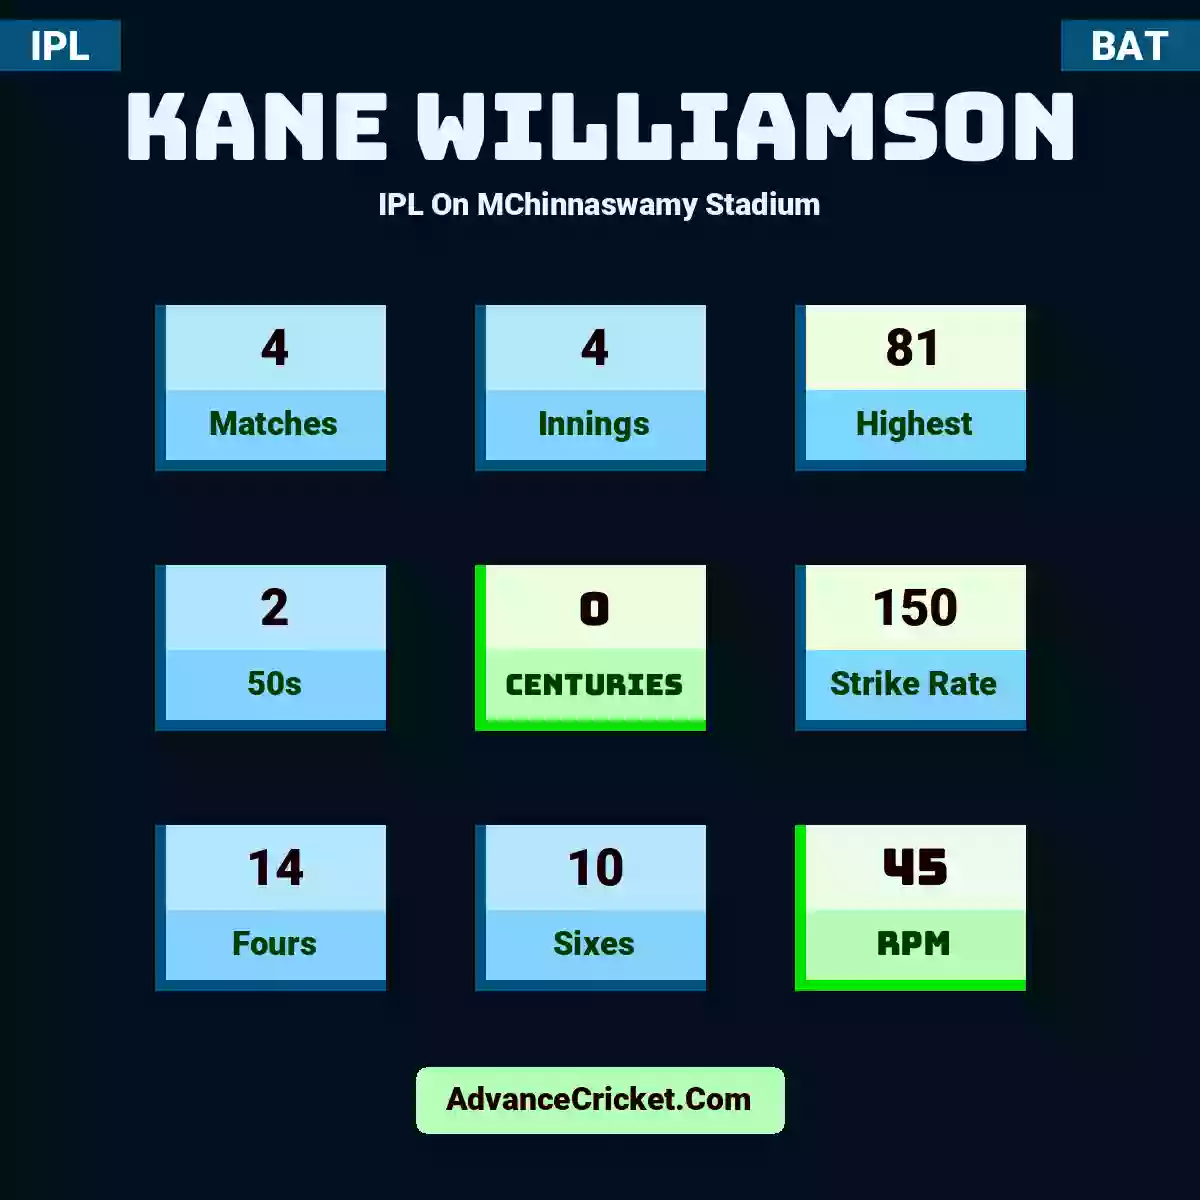 Kane Williamson IPL  On MChinnaswamy Stadium, Kane Williamson played 4 matches, scored 81 runs as highest, 2 half-centuries, and 0 centuries, with a strike rate of 150. K.Williamson hit 14 fours and 10 sixes, with an RPM of 45.